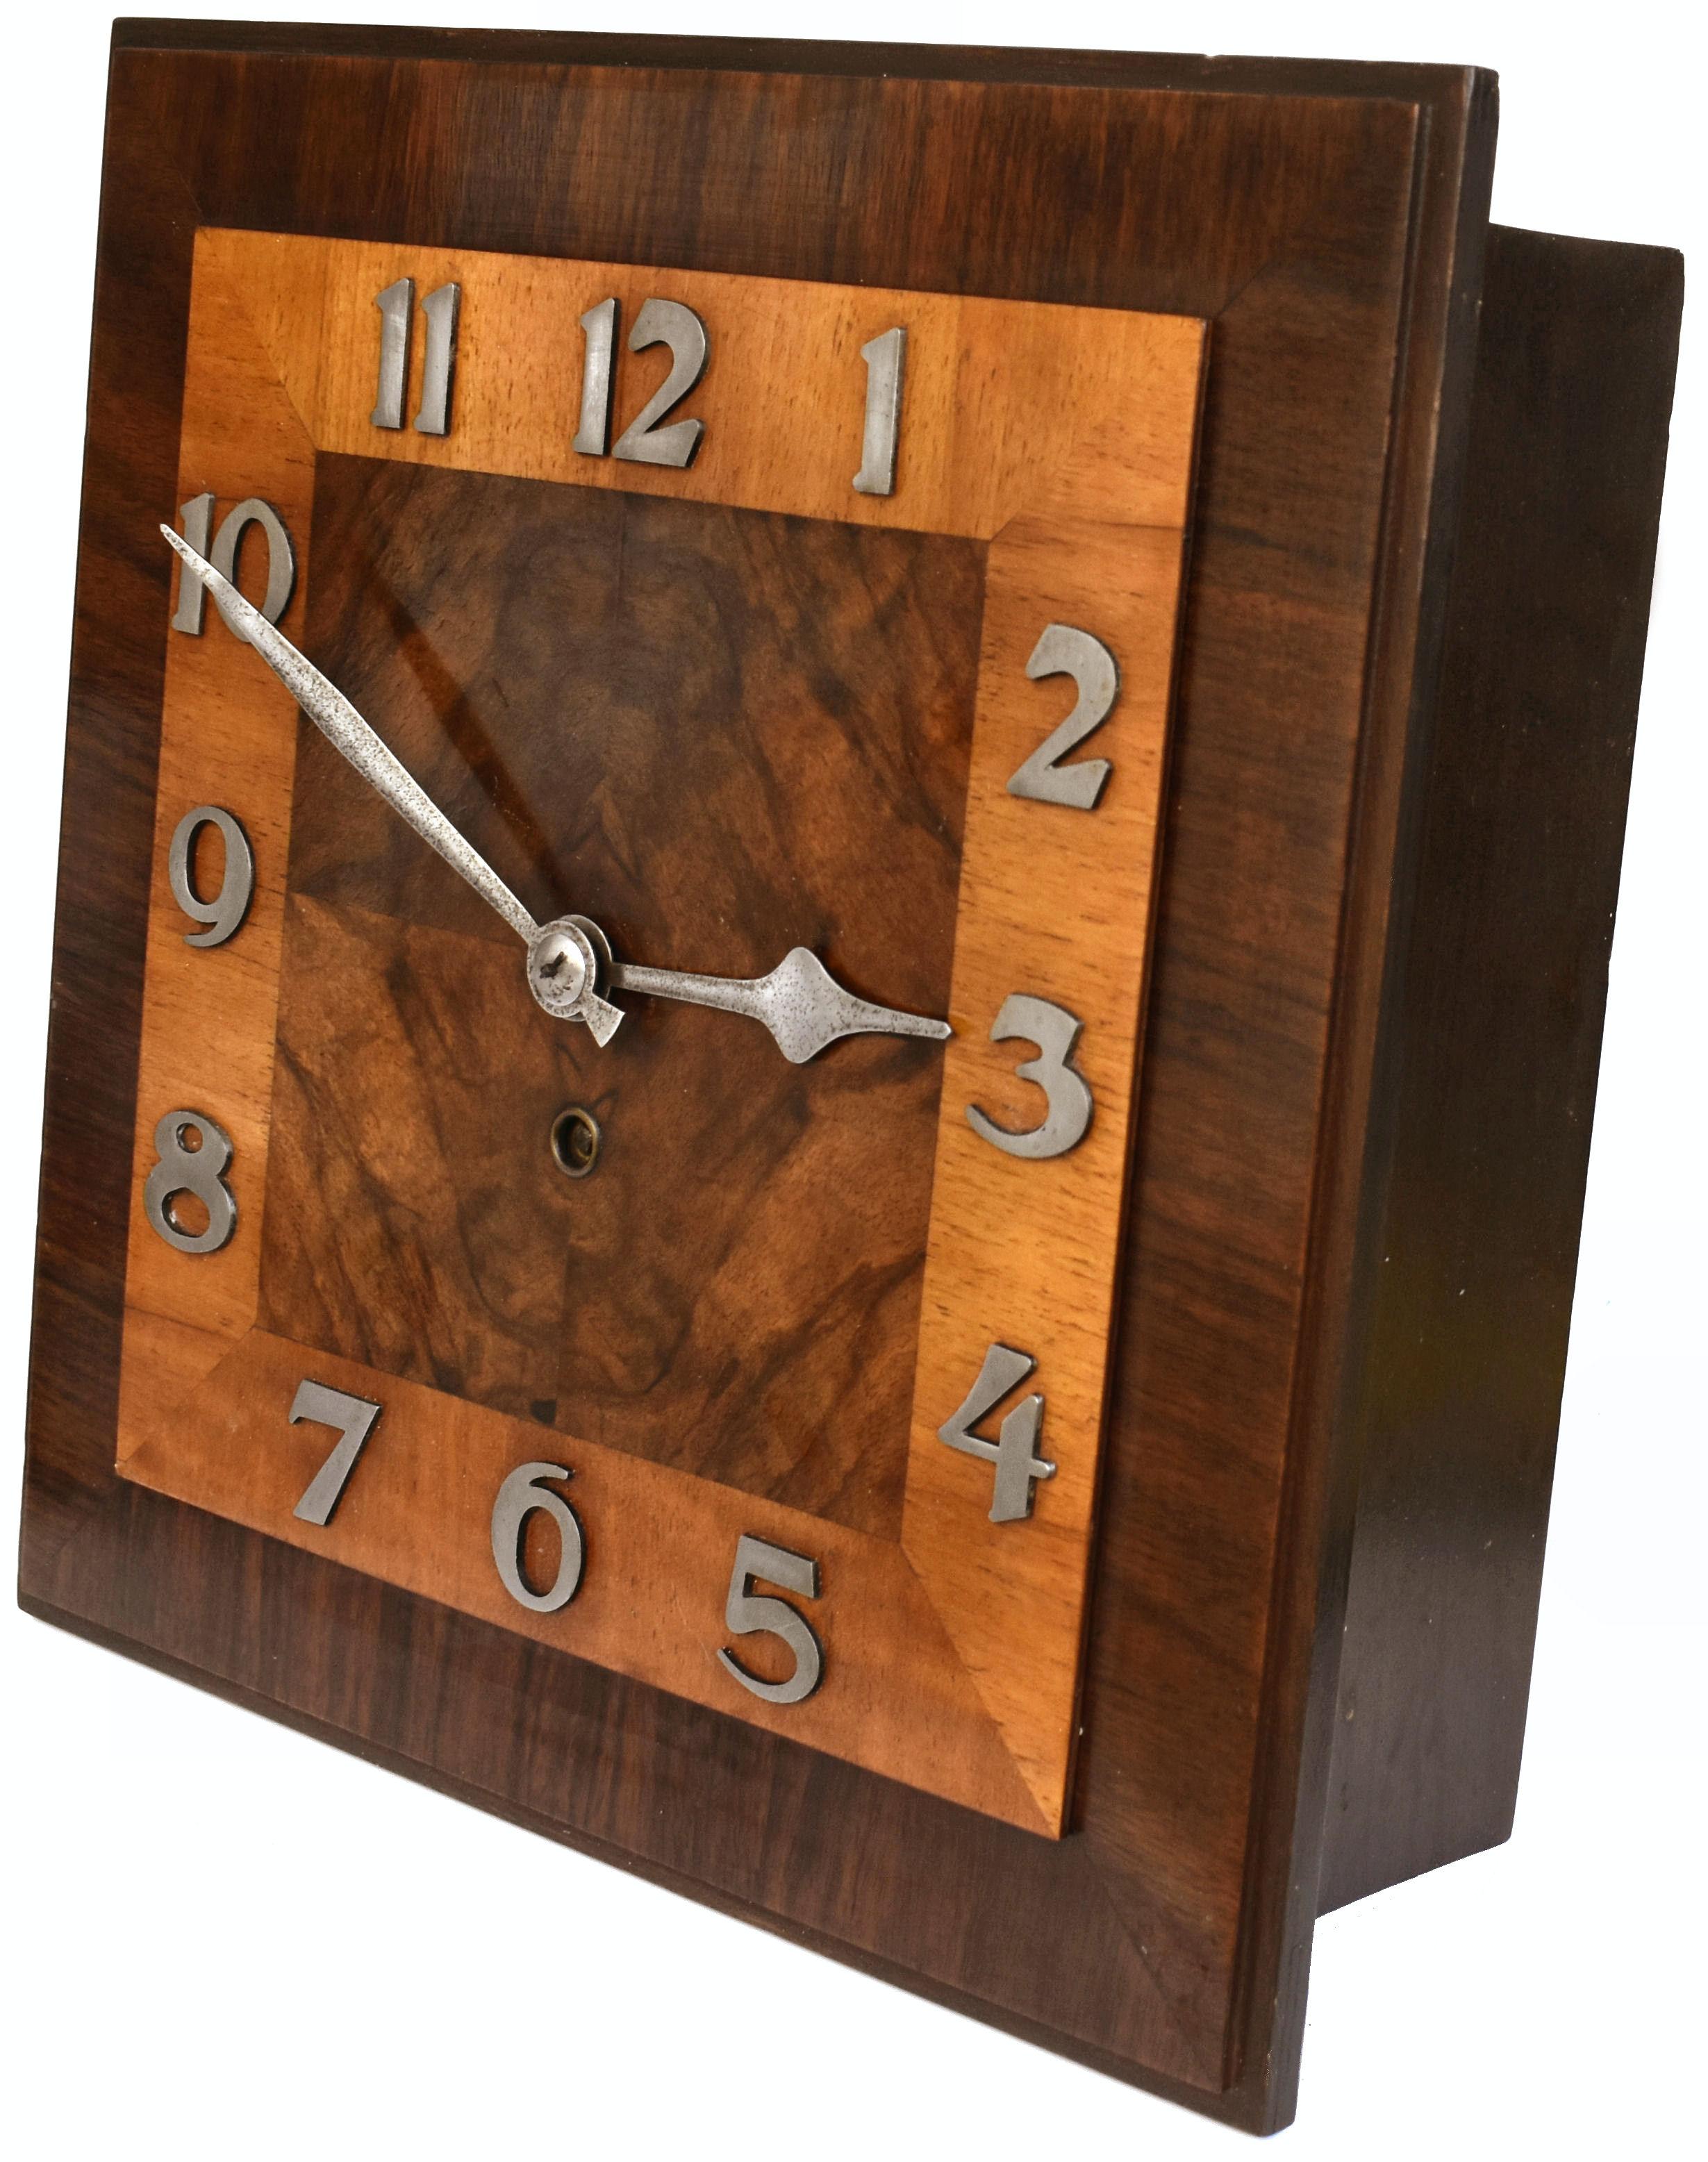 For your consideration is this large sized Art Deco Walnut wall clock, English, circa 1930, fully serviced and keeping good time. The dial is made up of book paged figured walnut central square with a two tone feather banding edging in a mid tone